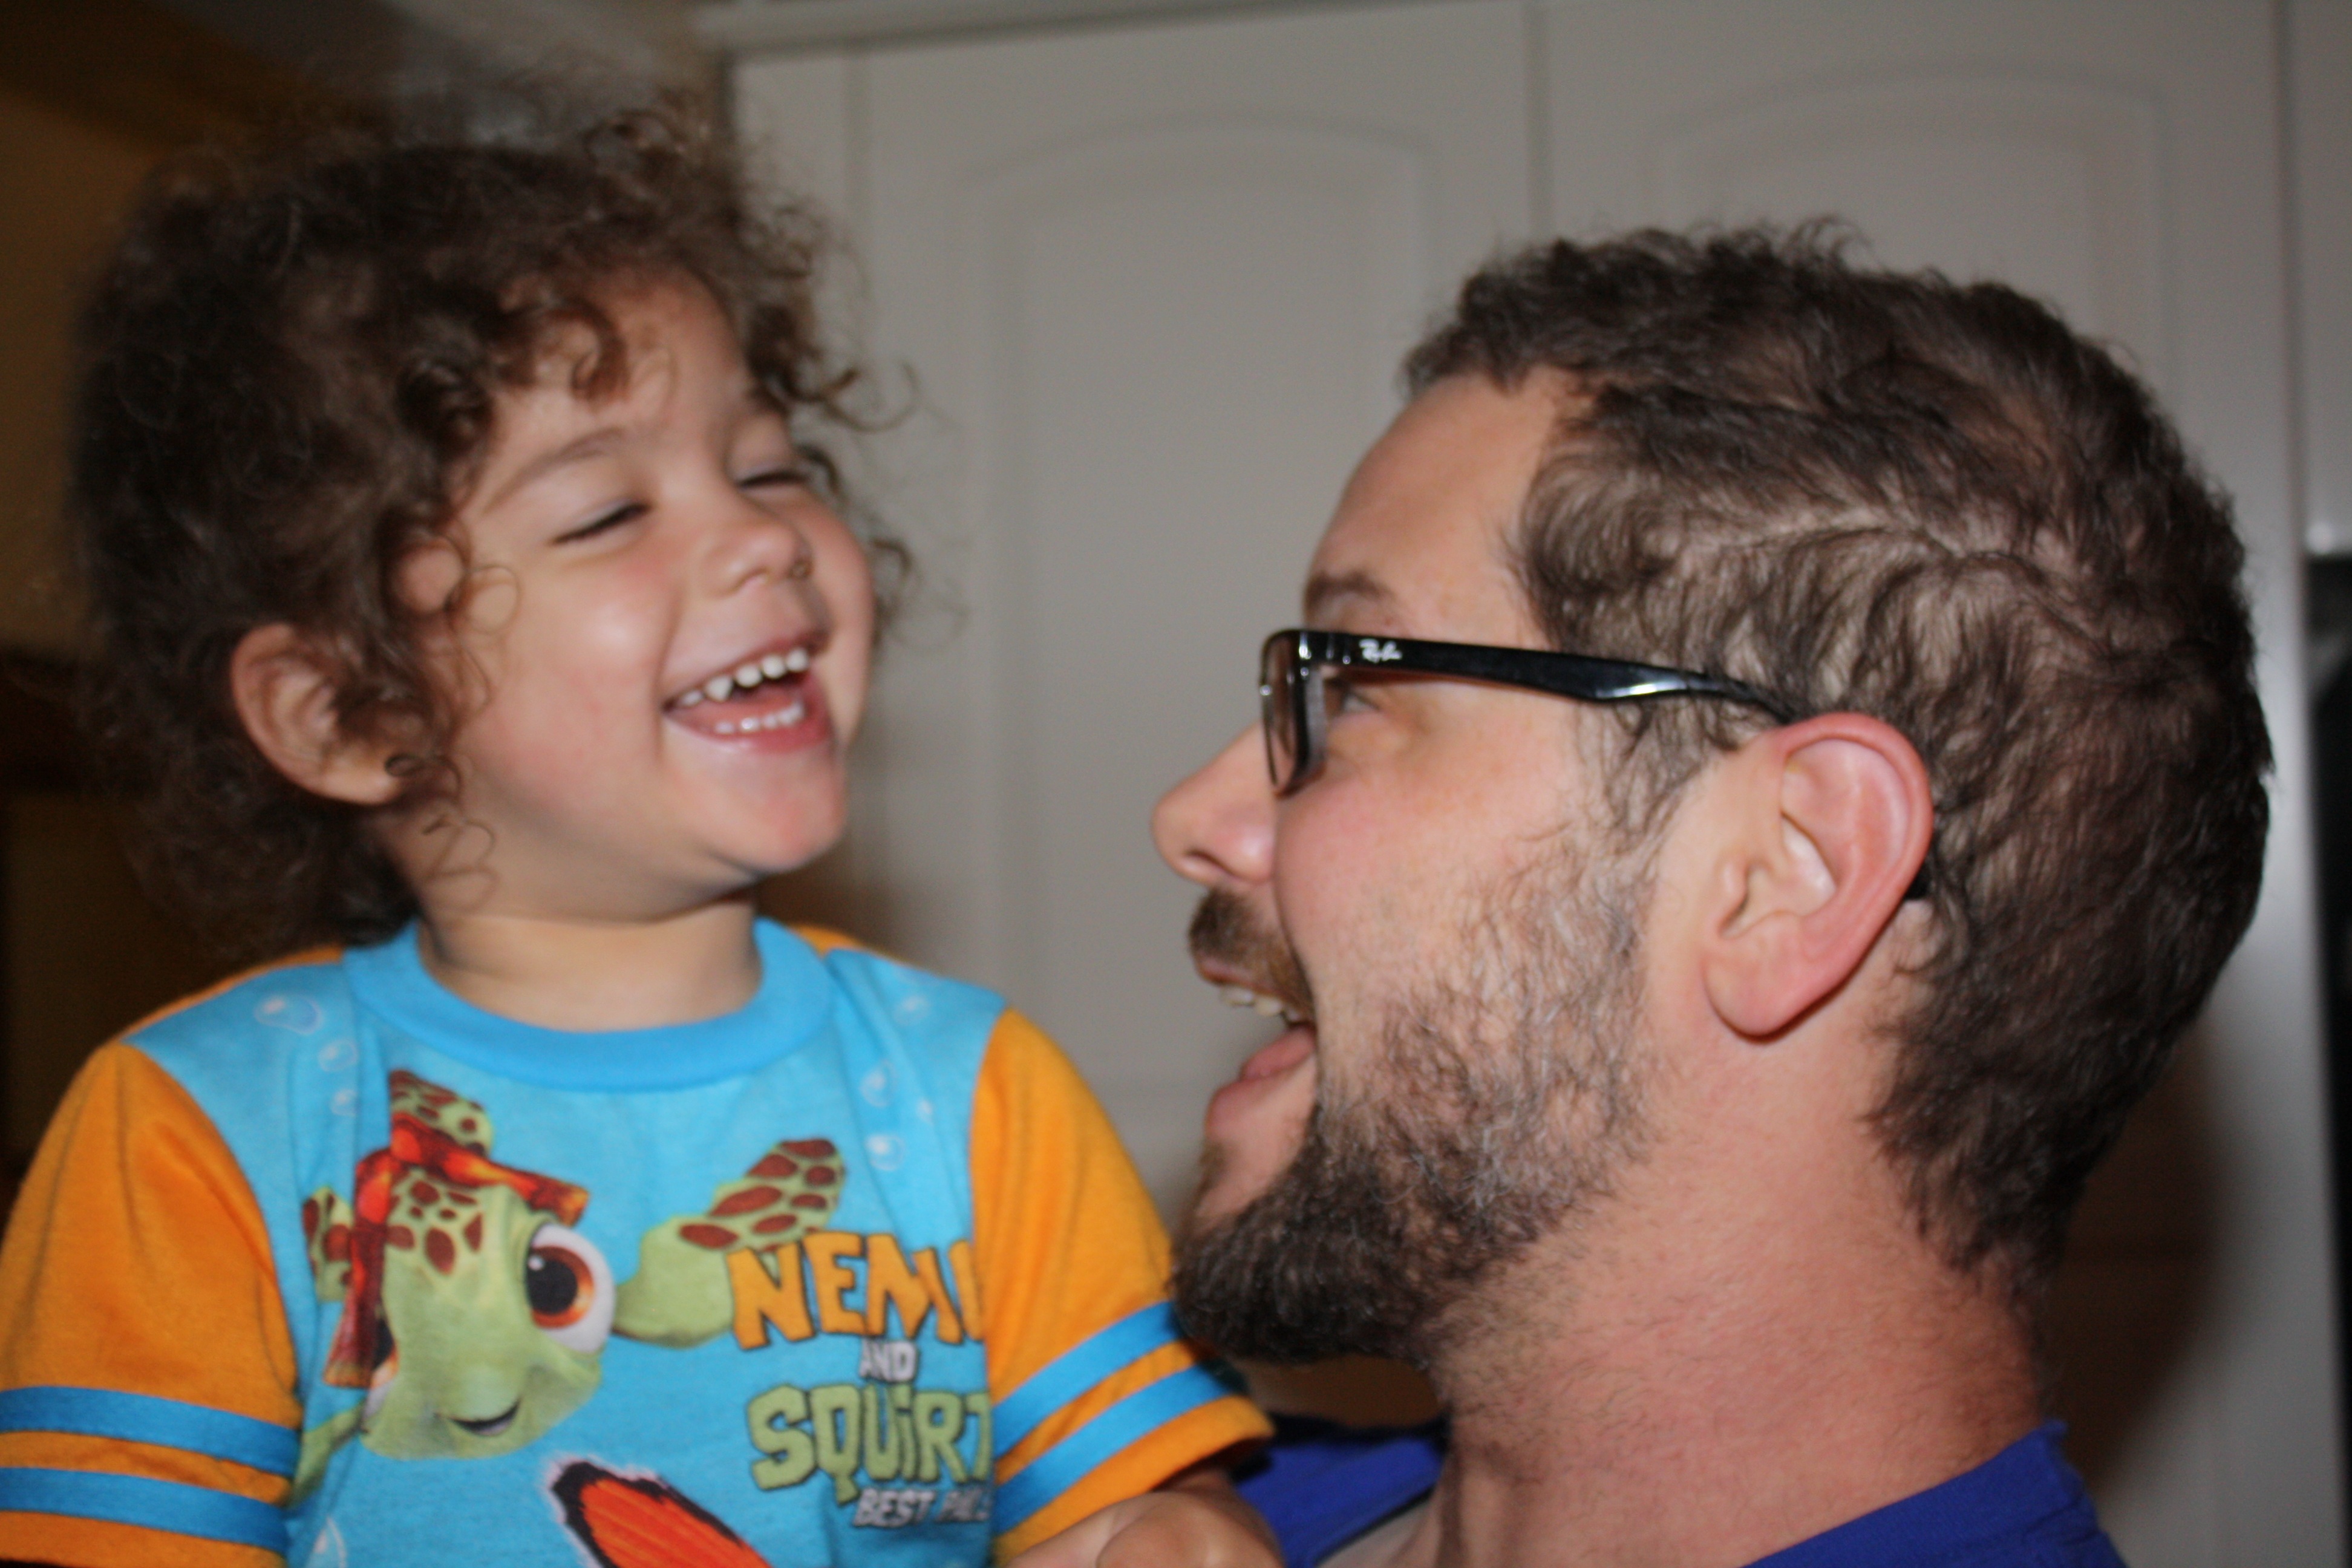 Coraline and her poppa laughing it up